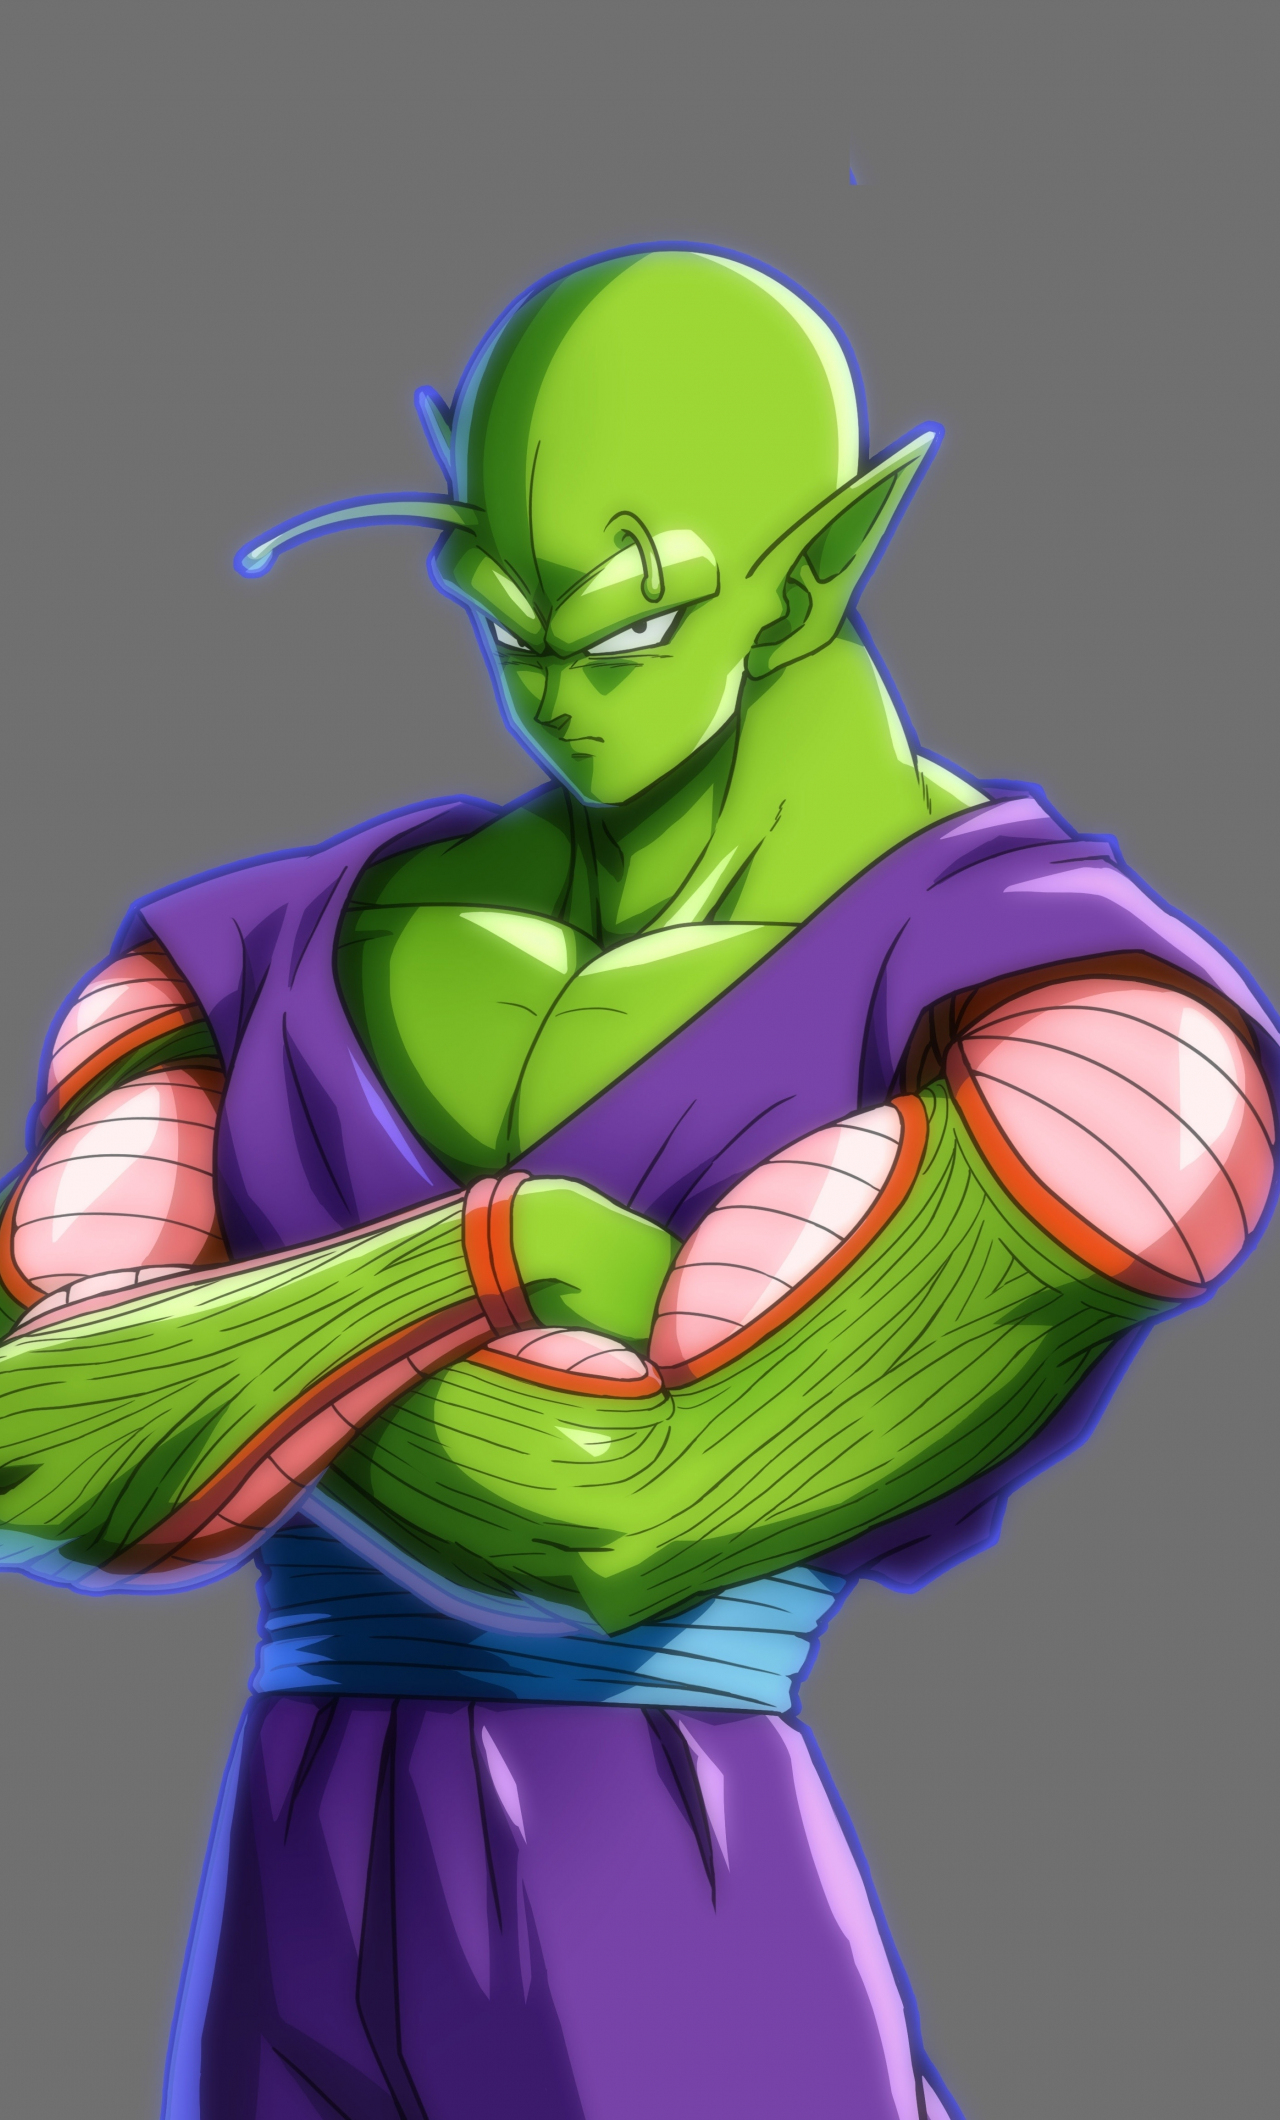 1280x2120 Download piccolo, dragon ball fighterz, video game, anime wallpaper, iphone 6 plus, hd image, background, 6249